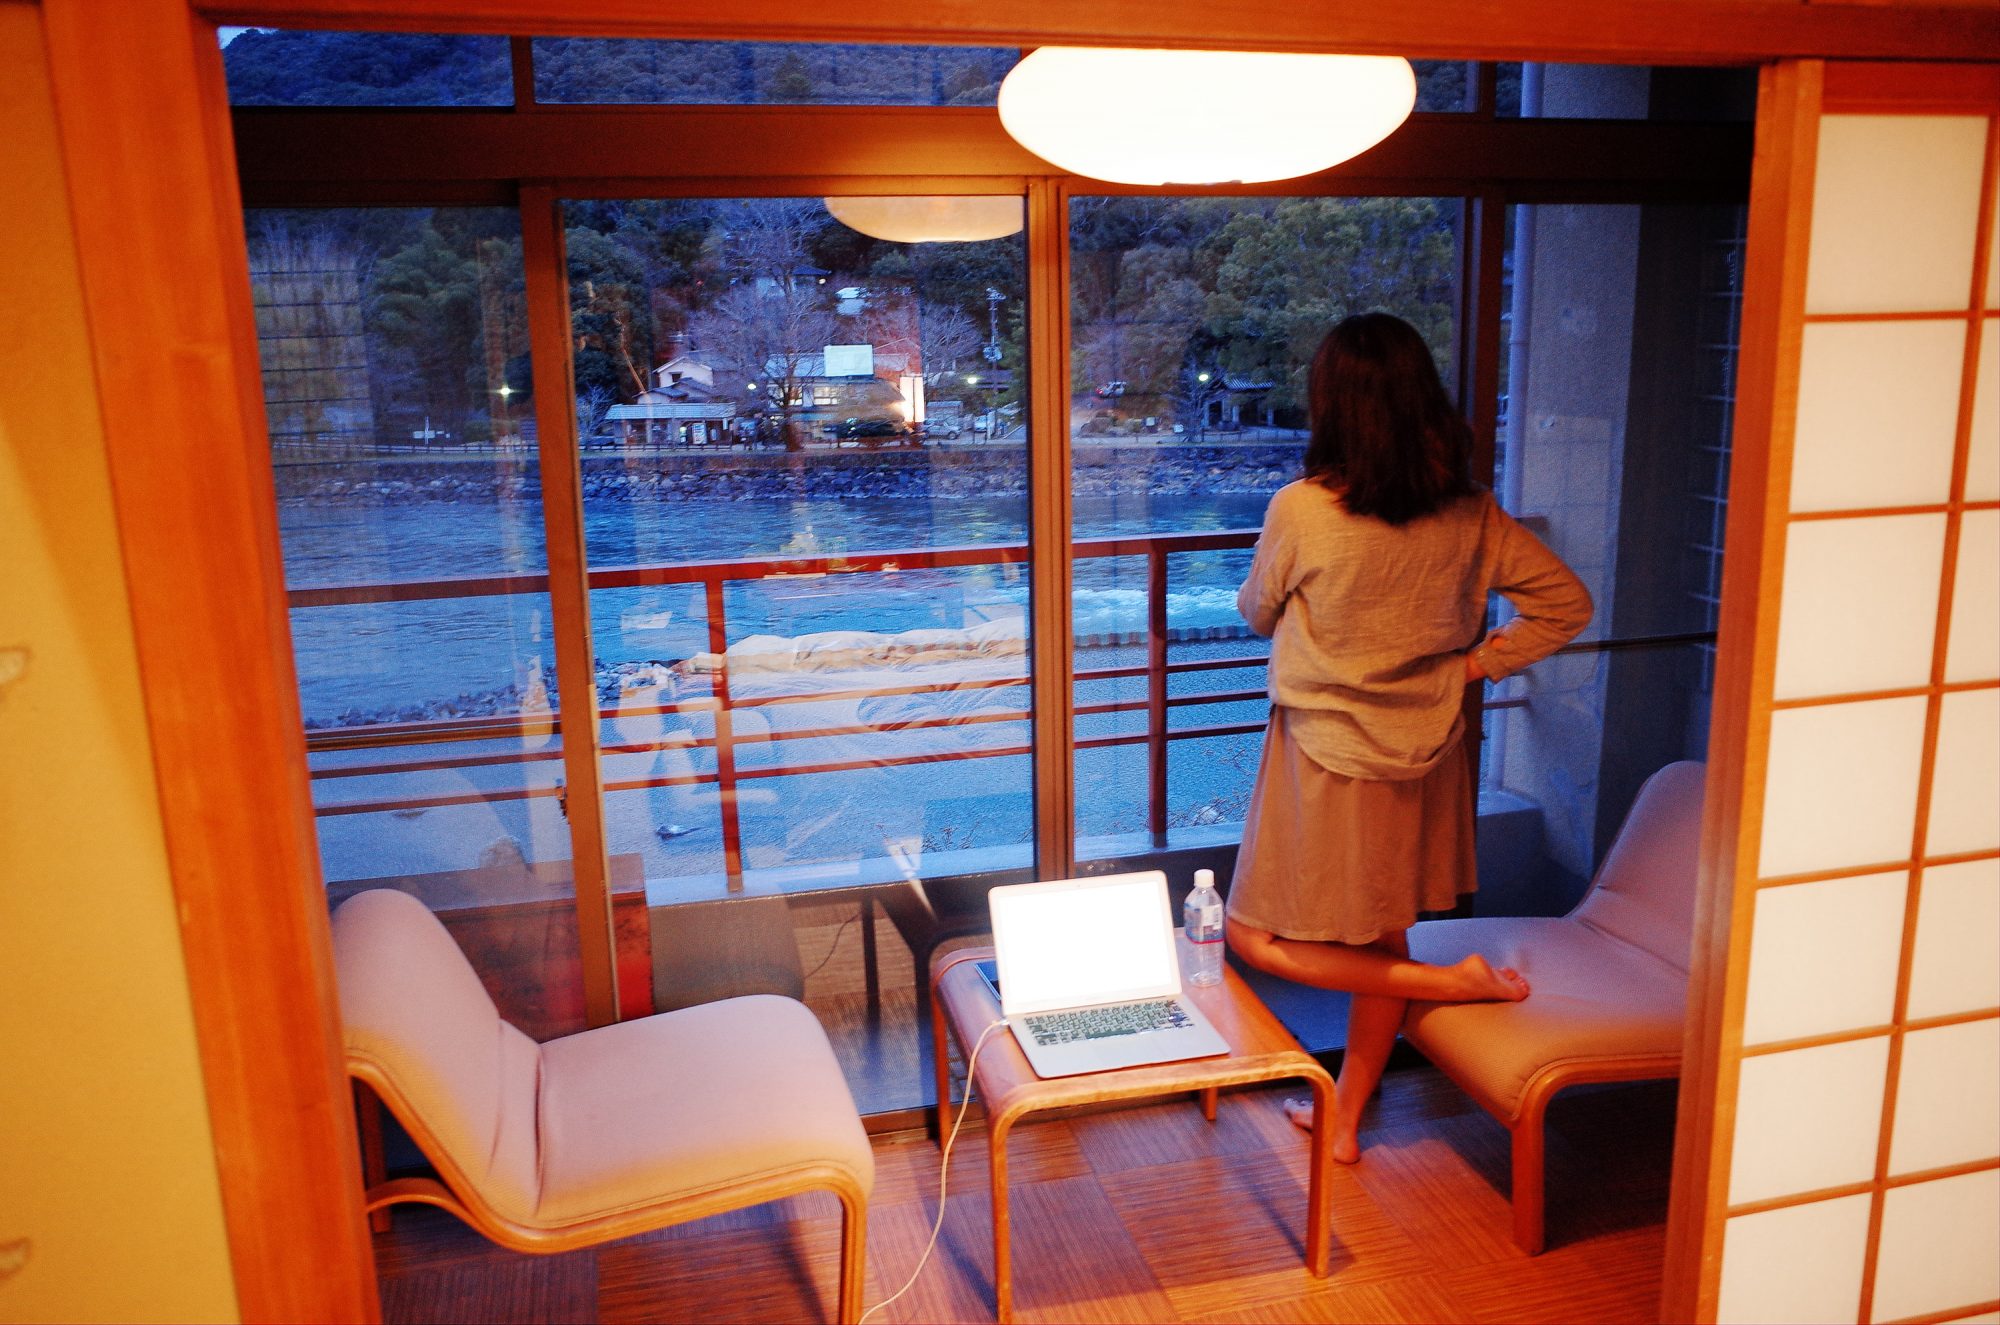 Cindy inside our Ryokan, looking out towards the water.